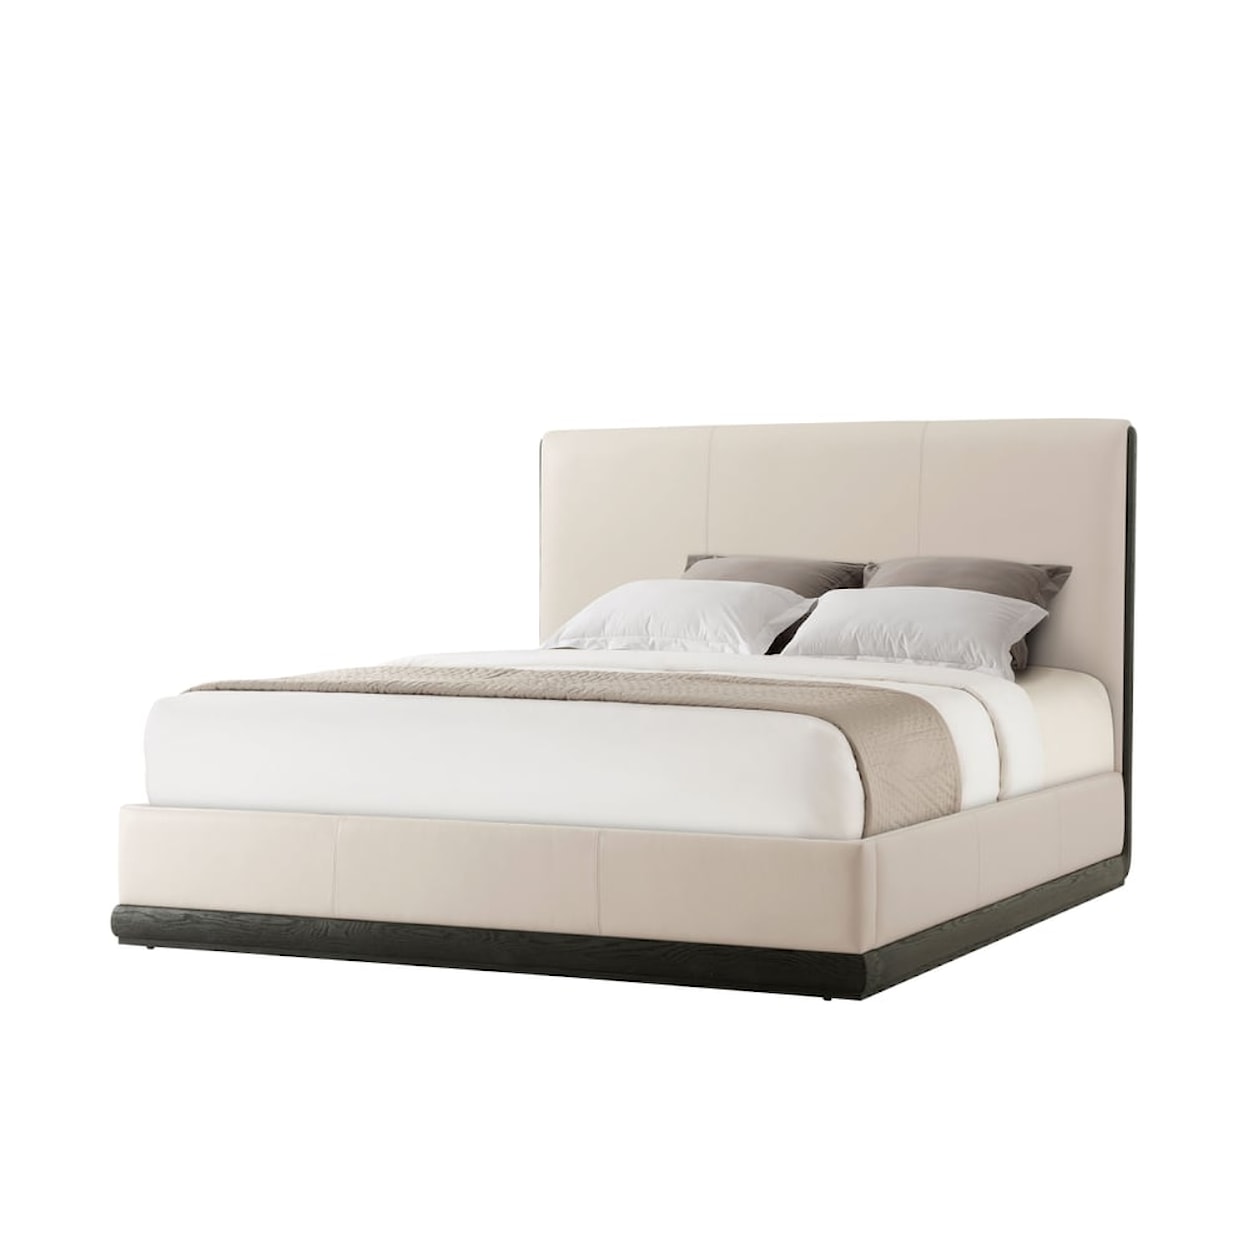 Theodore Alexander Repose Repose Upholstered US Call King Bed